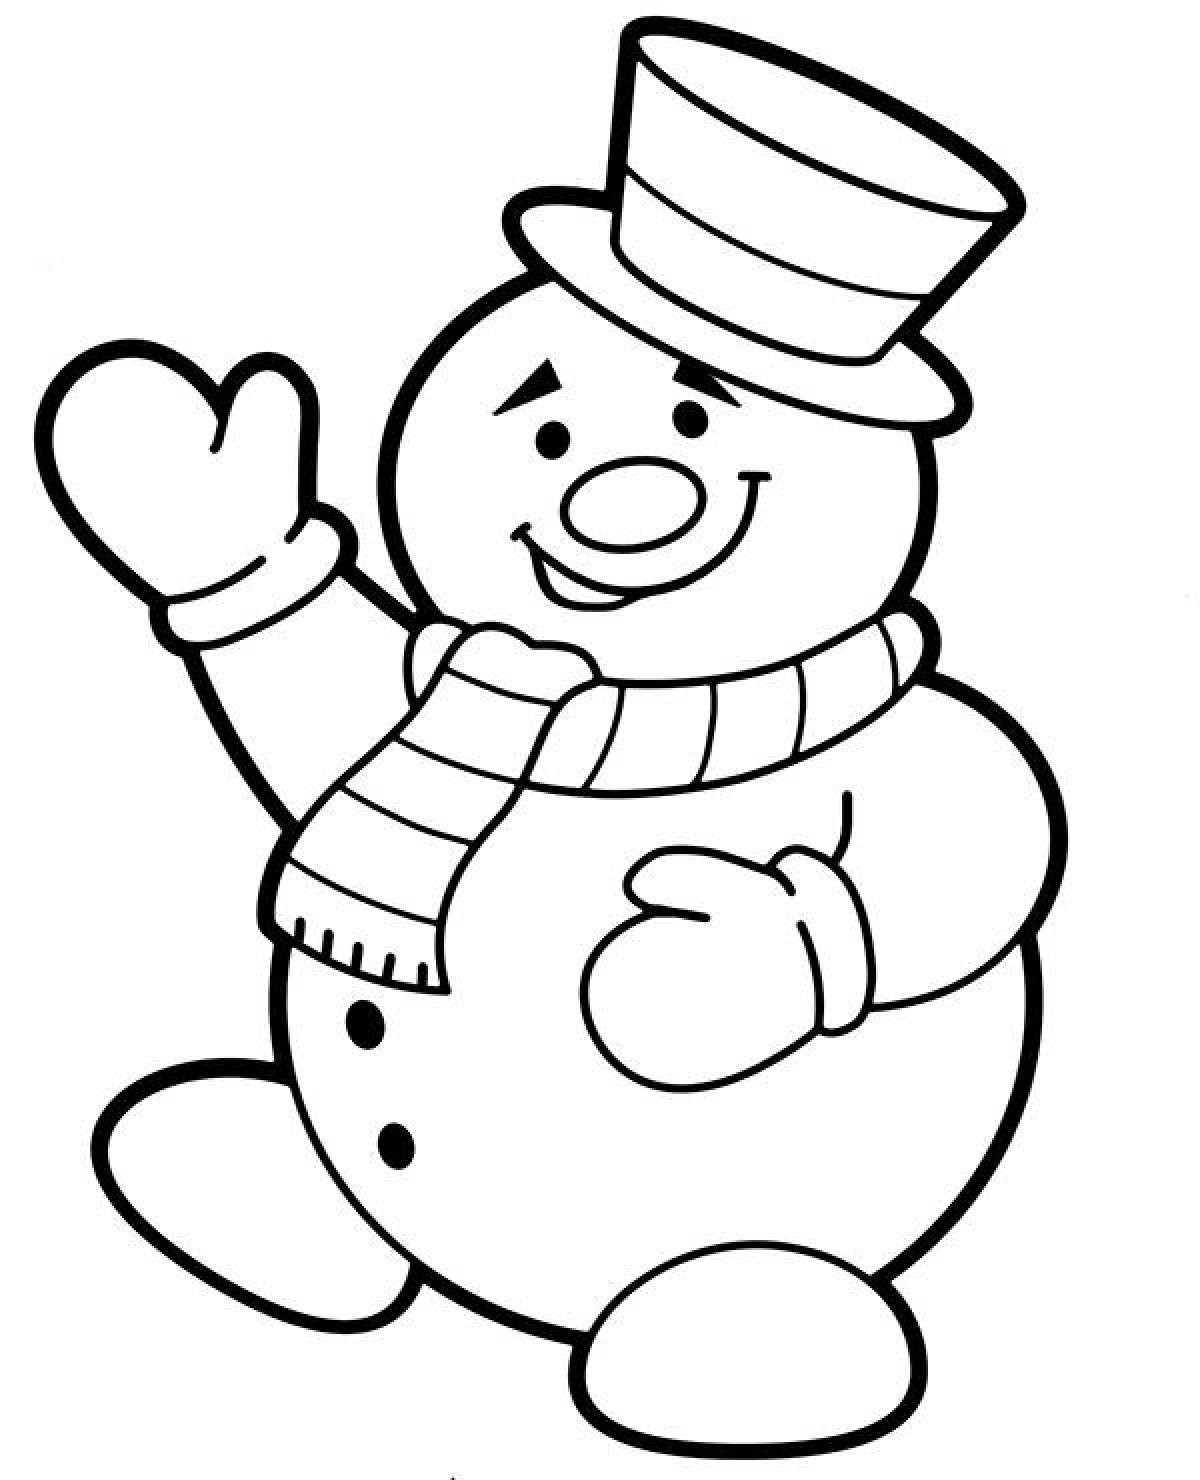 A fascinating snowman coloring book